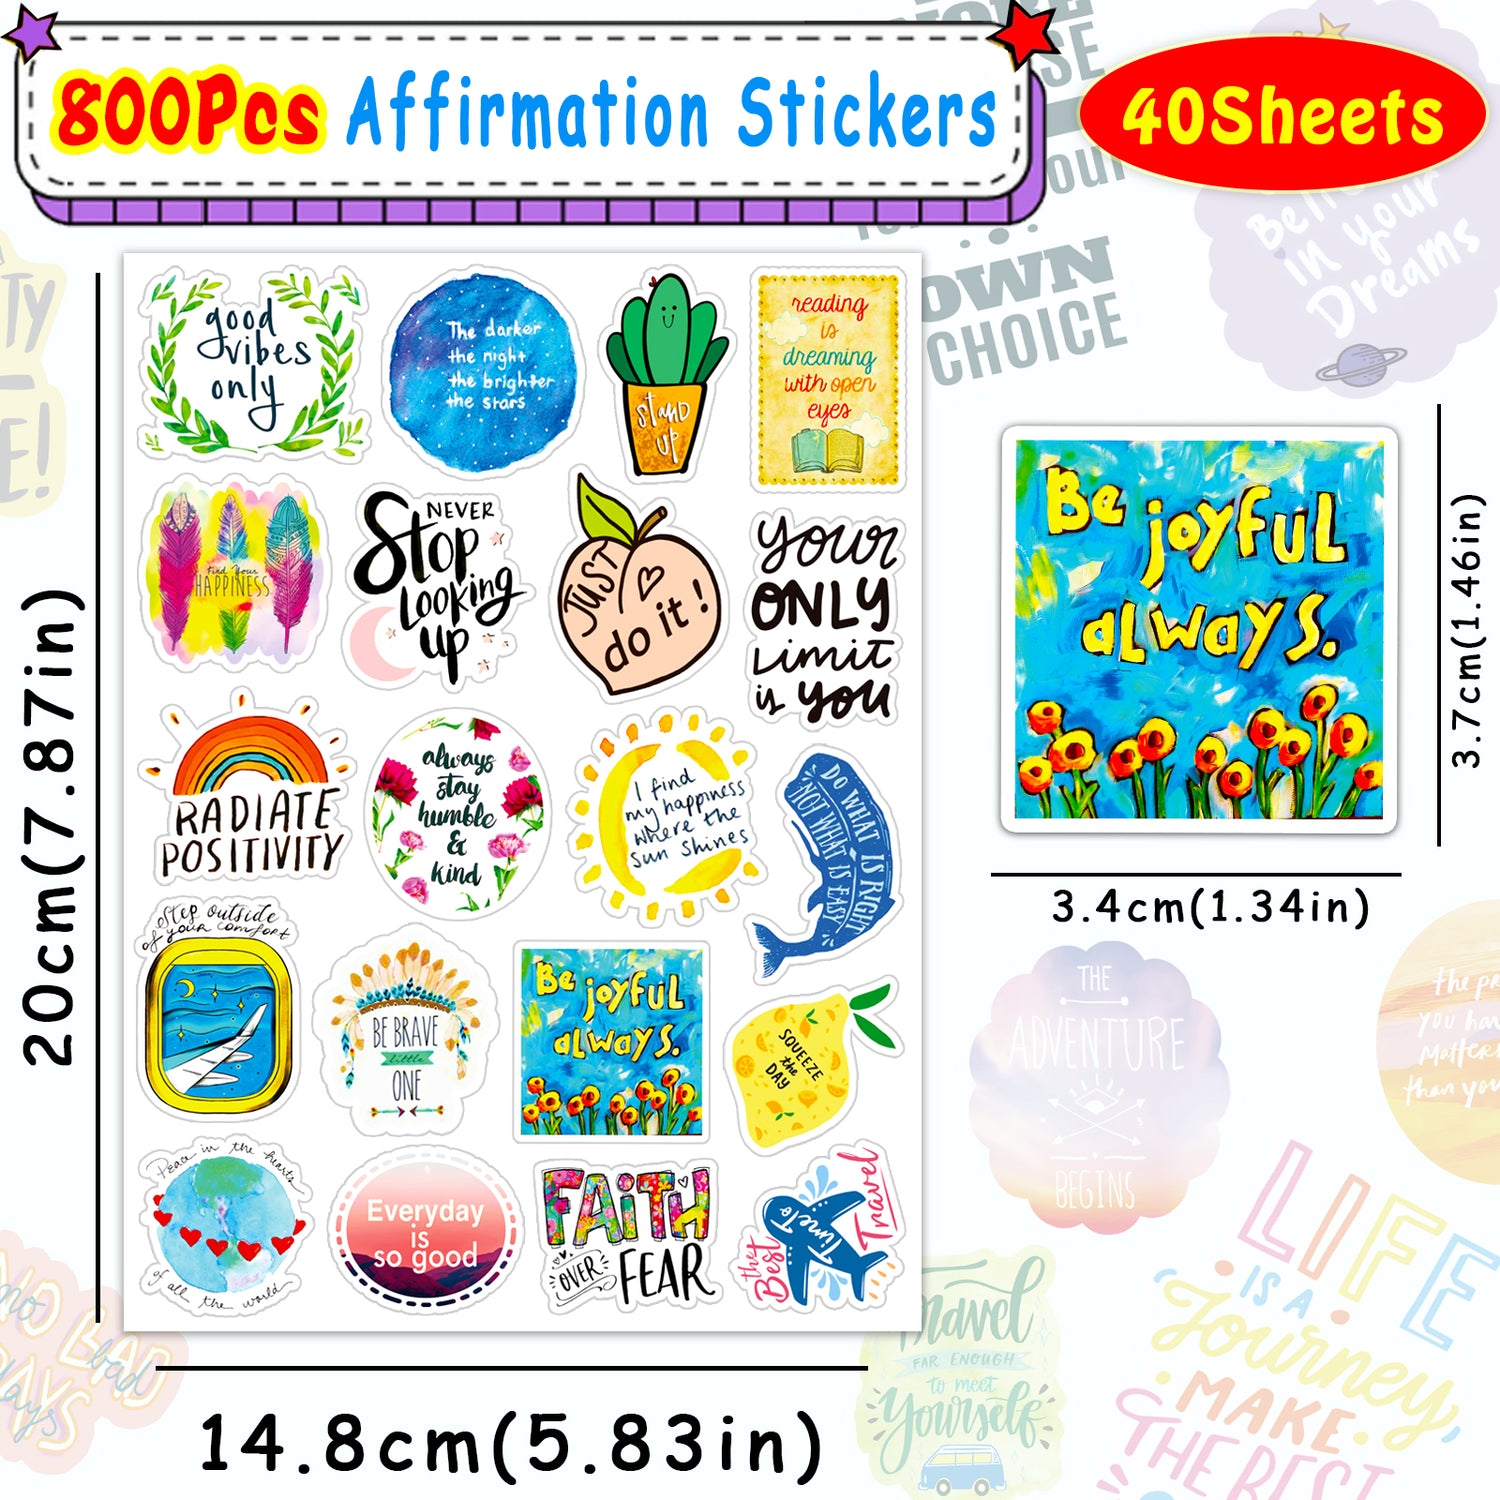 800PCS Positive Stickers for Thanksgiving Cards, Gift Box Packing